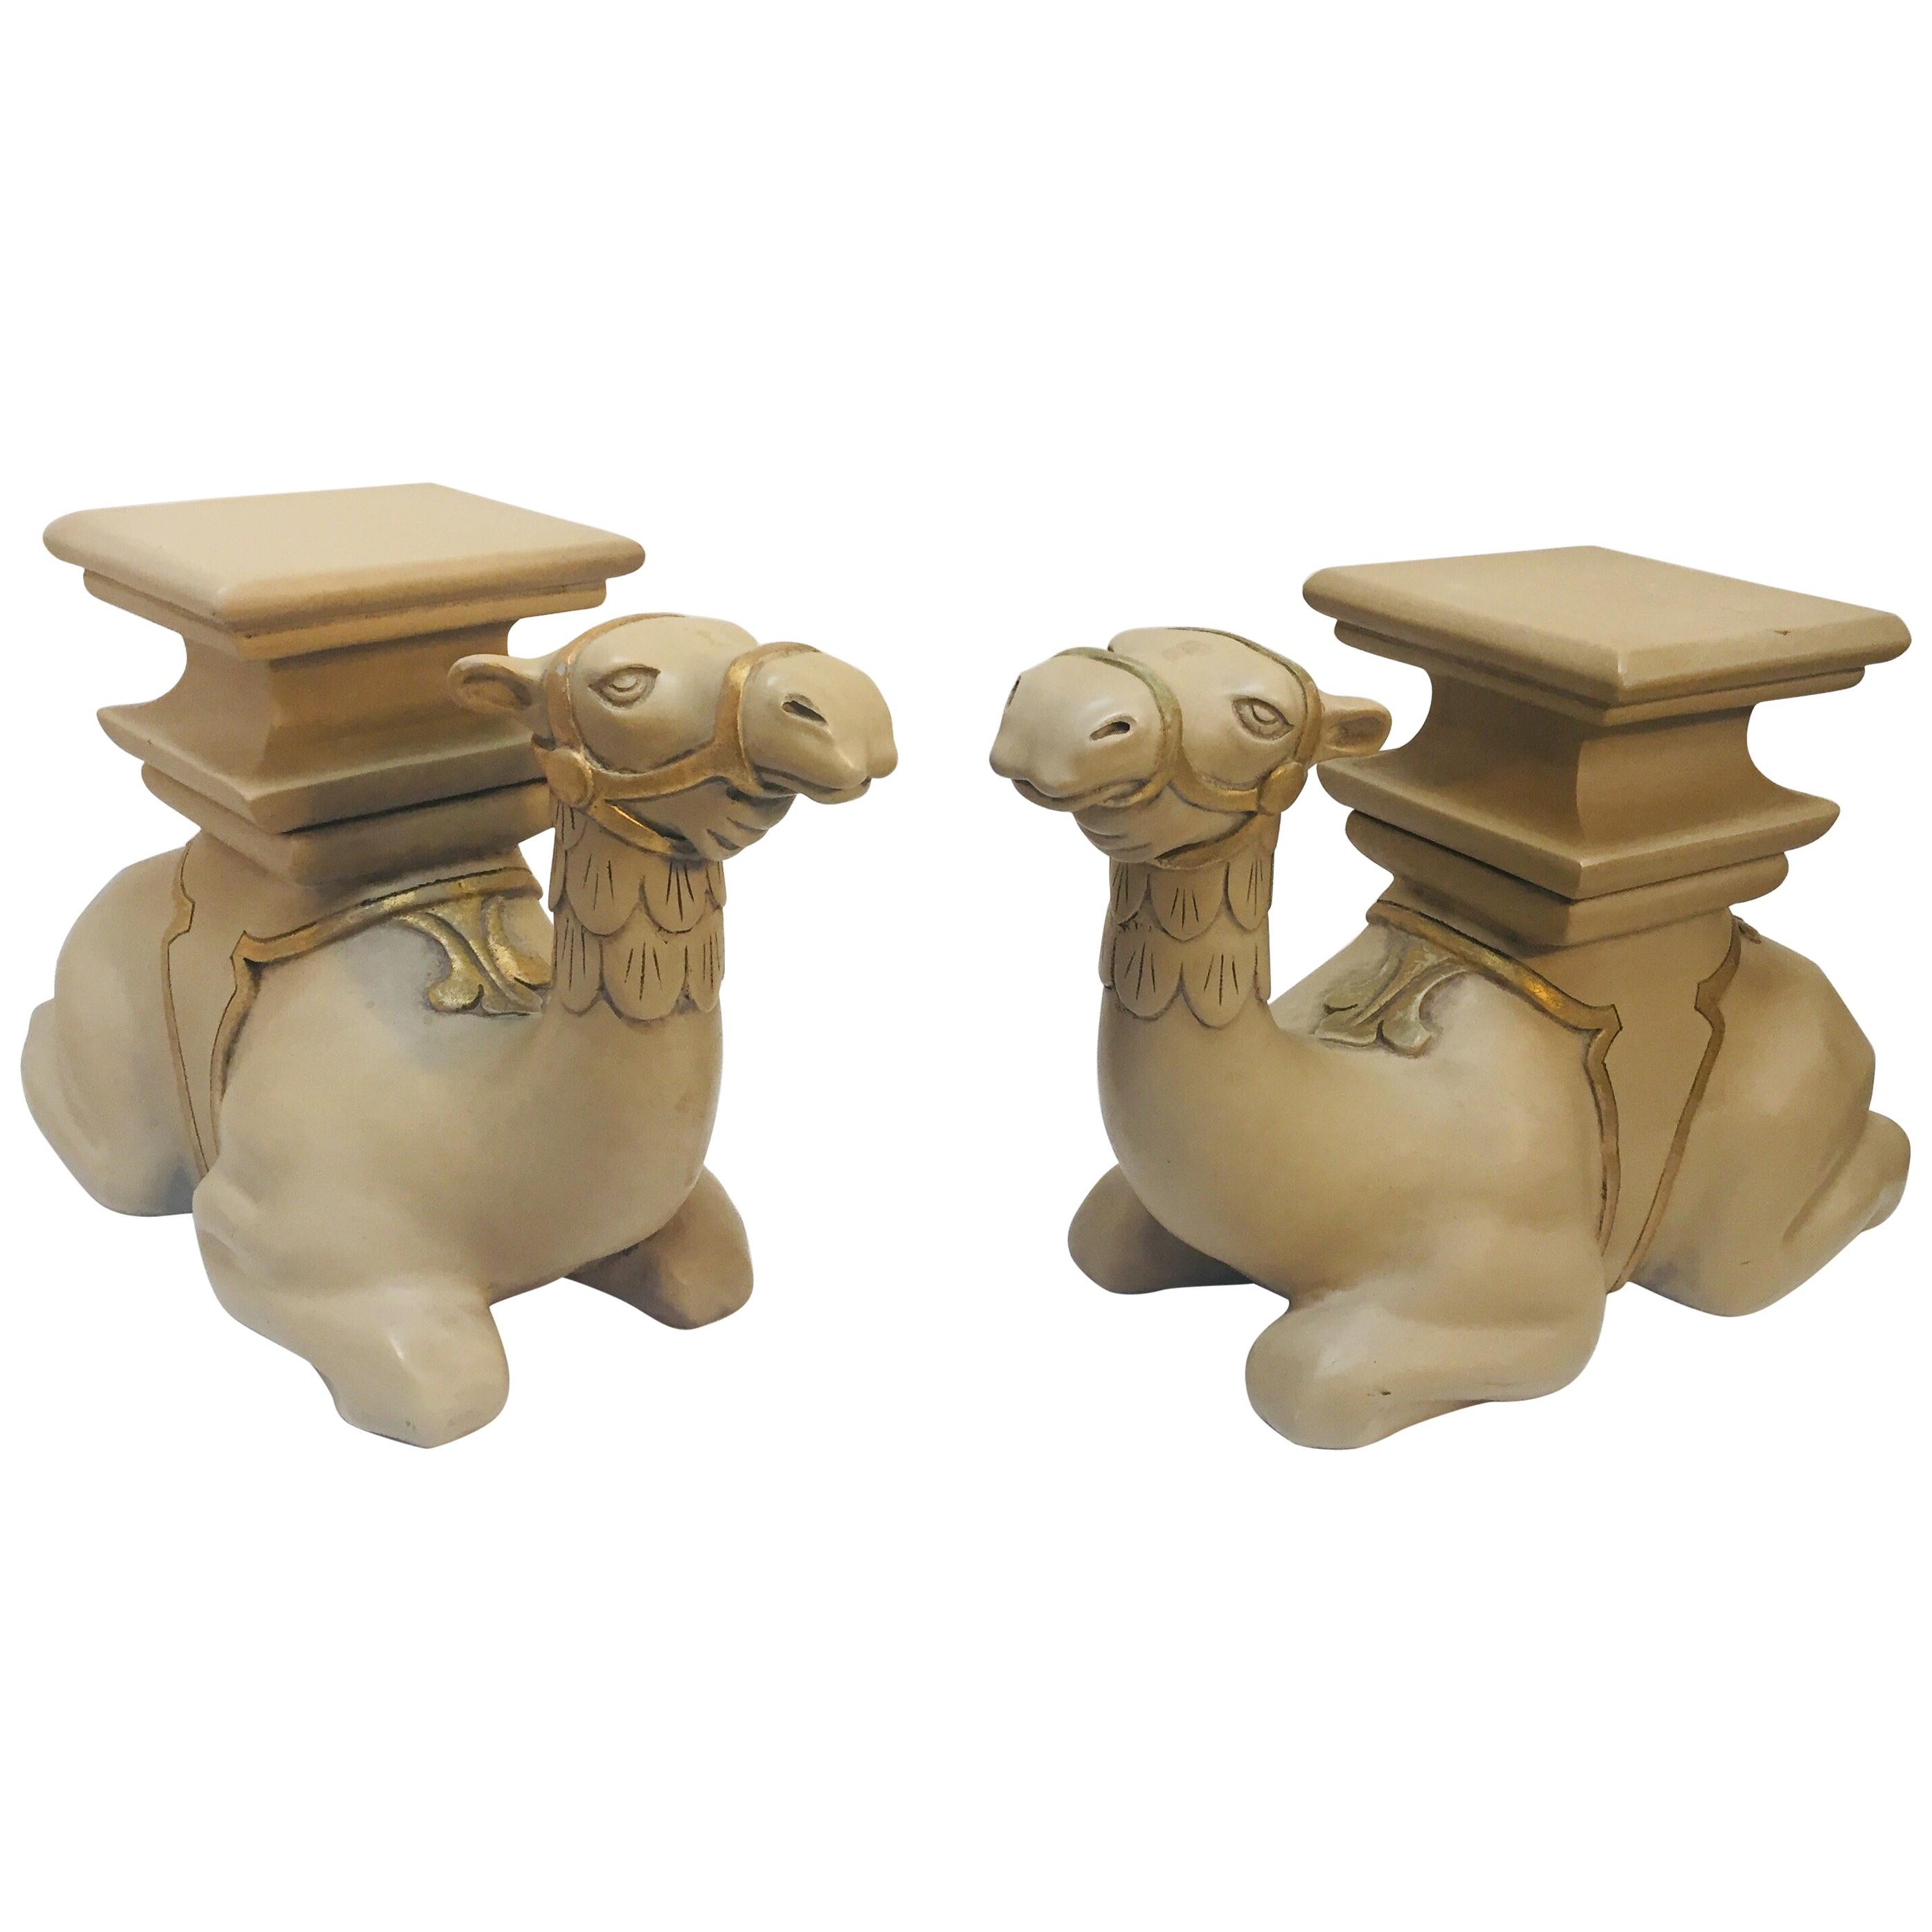 Pair of Camel Sculptures Stools or Side Tables